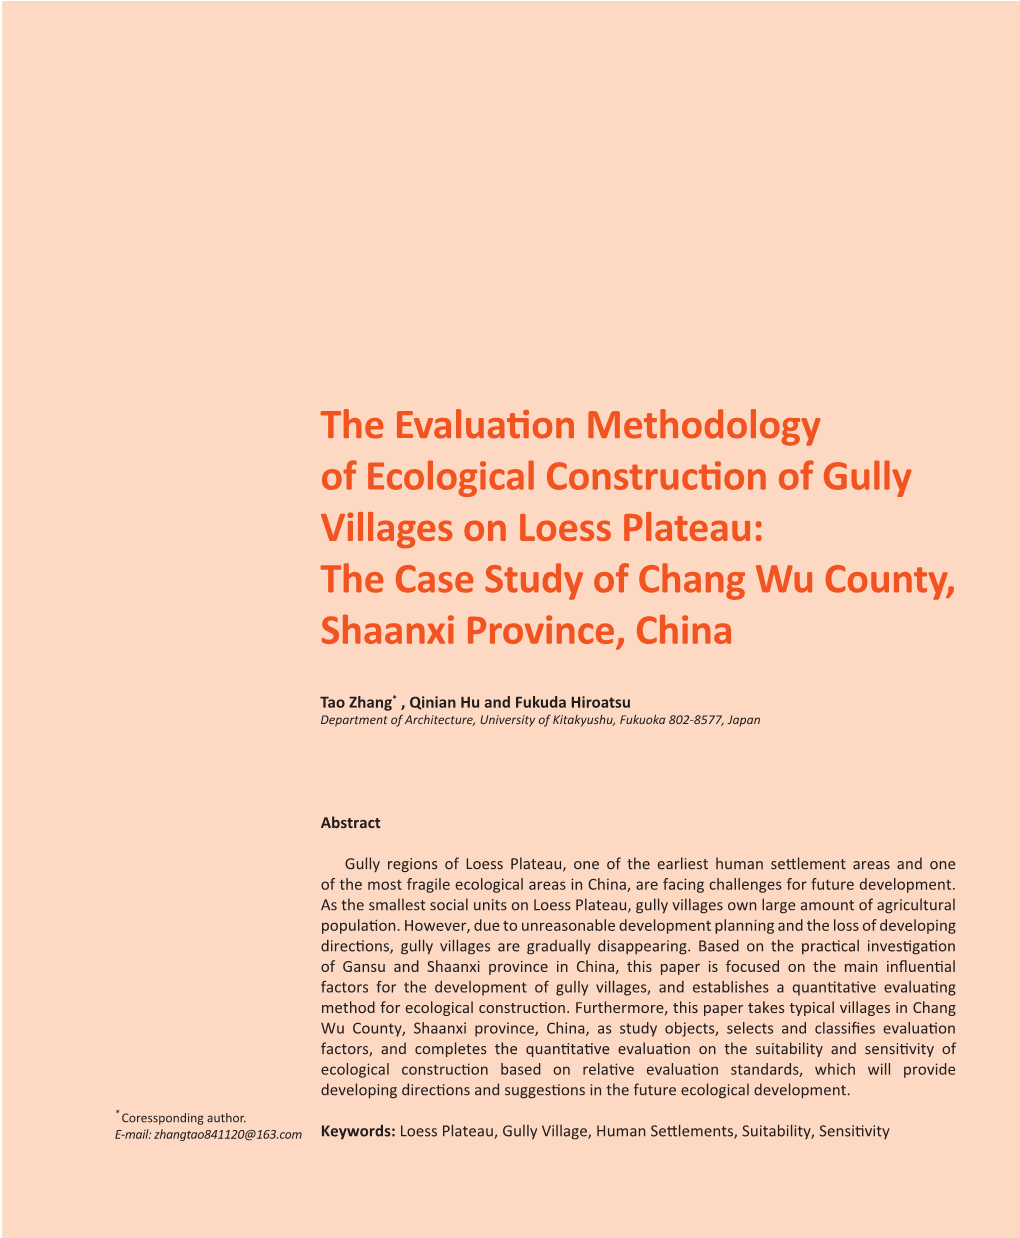 The Evaluation Methodology of Ecological Construction of Gully Villages on Loess Plateau: the Case Study of Chang Wu County, Shaanxi Province, China